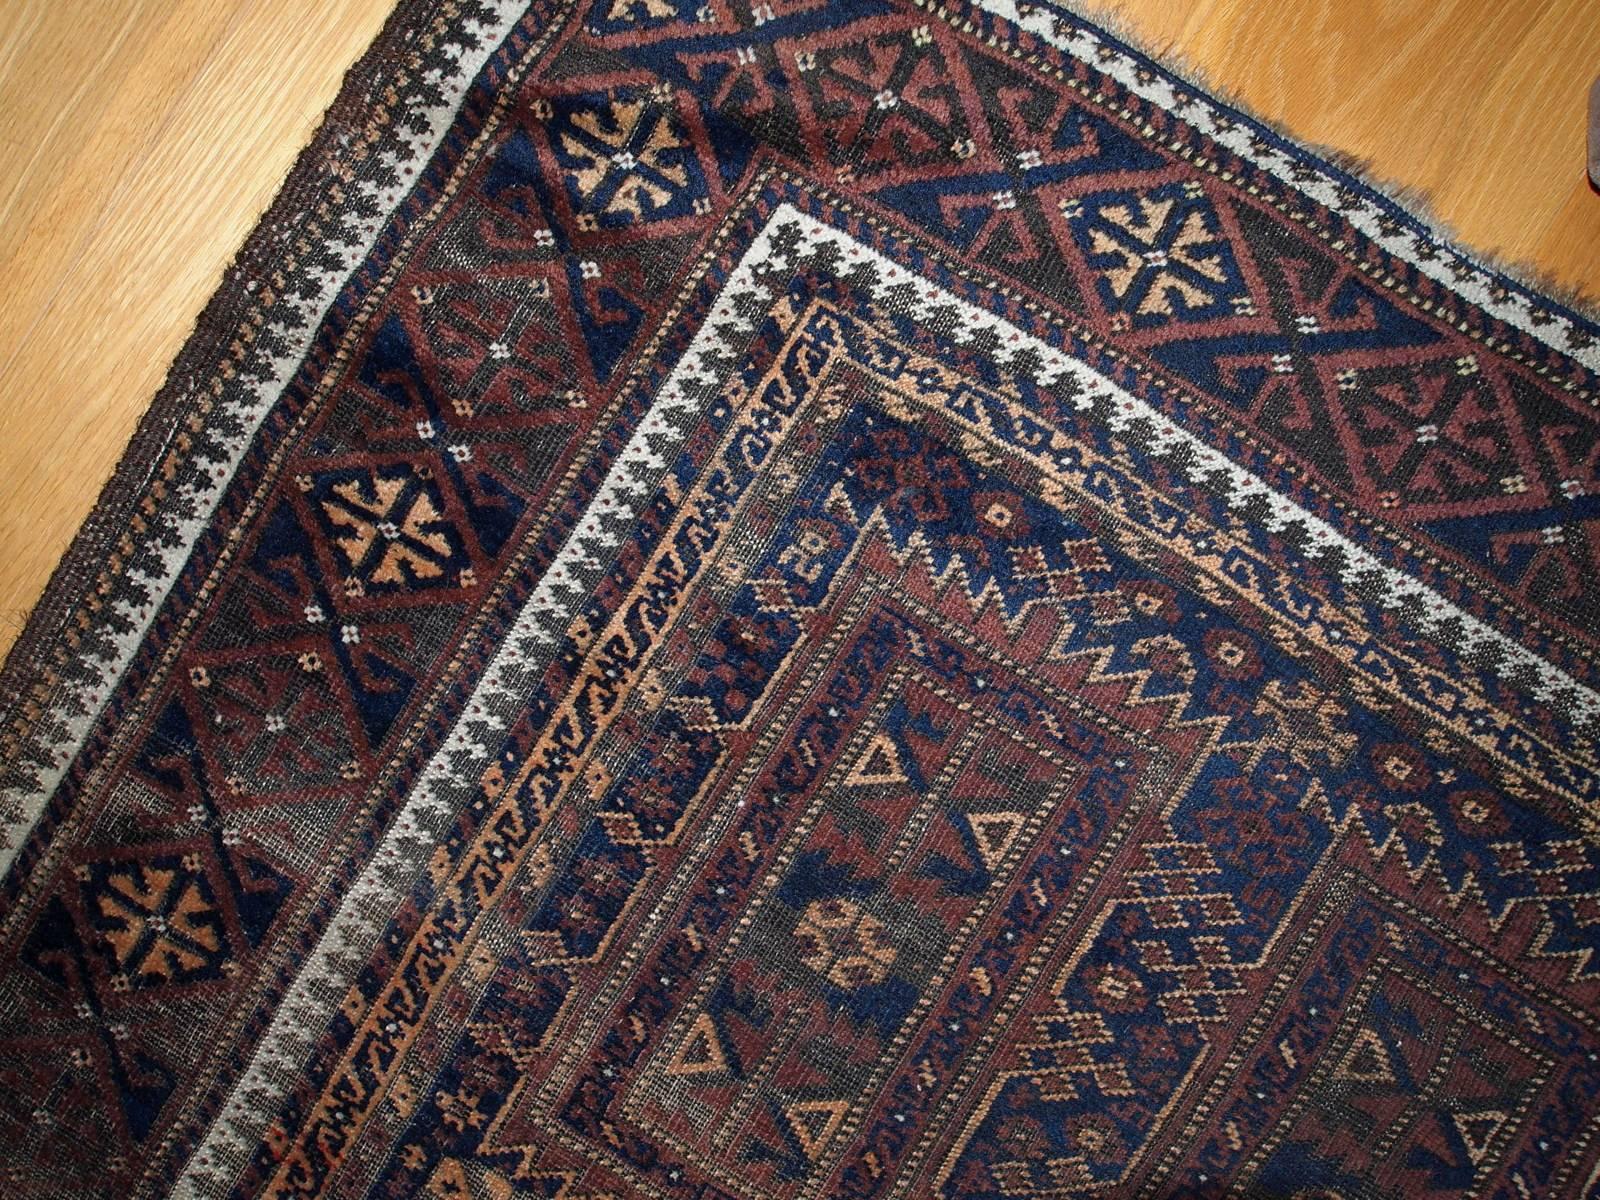 Antique handmade Afghan Baluch rug. This rug has tribal design in brown, burgundy and blue shades. Condition is worn due to age, but still very beautiful rug. Also very unusual size for this type of rugs which makes it an interesting piece of art.